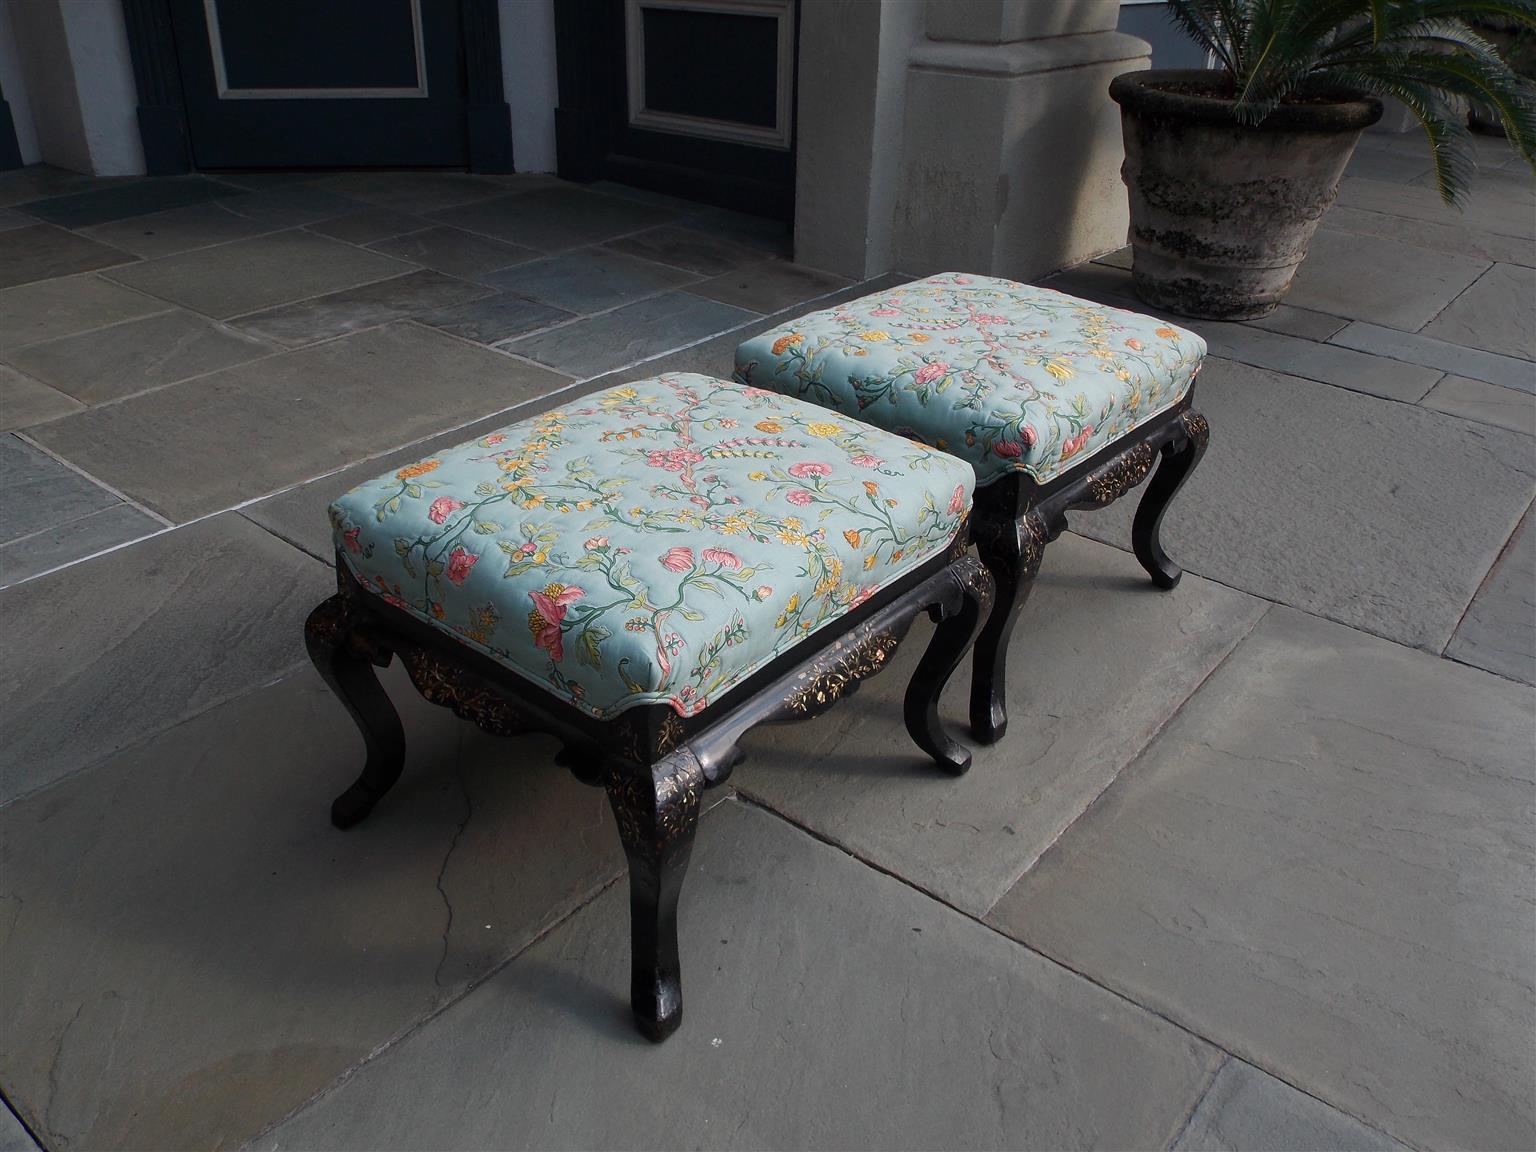 Pair of English Regency black lacquered upholstered stools with mother of pearl inlays, quilted floral upholstery, carved scalloped skirts, and resting on shaped knees with cabriole legs, Early 19th century.